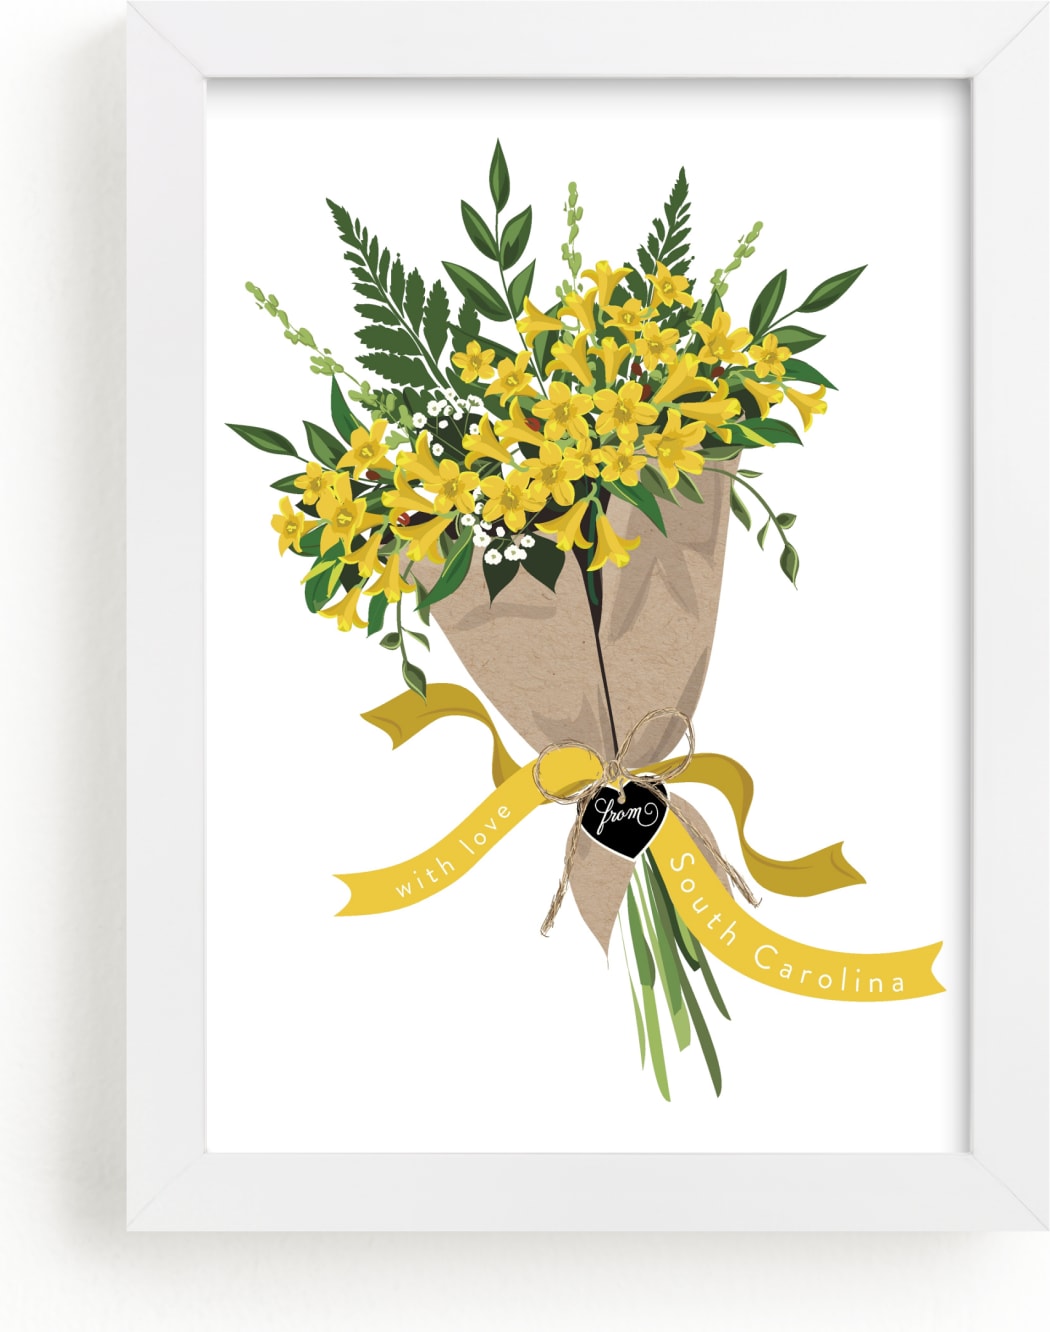 This is a yellow art by Susan Moyal called South Carolina Jessamine Bouquet.